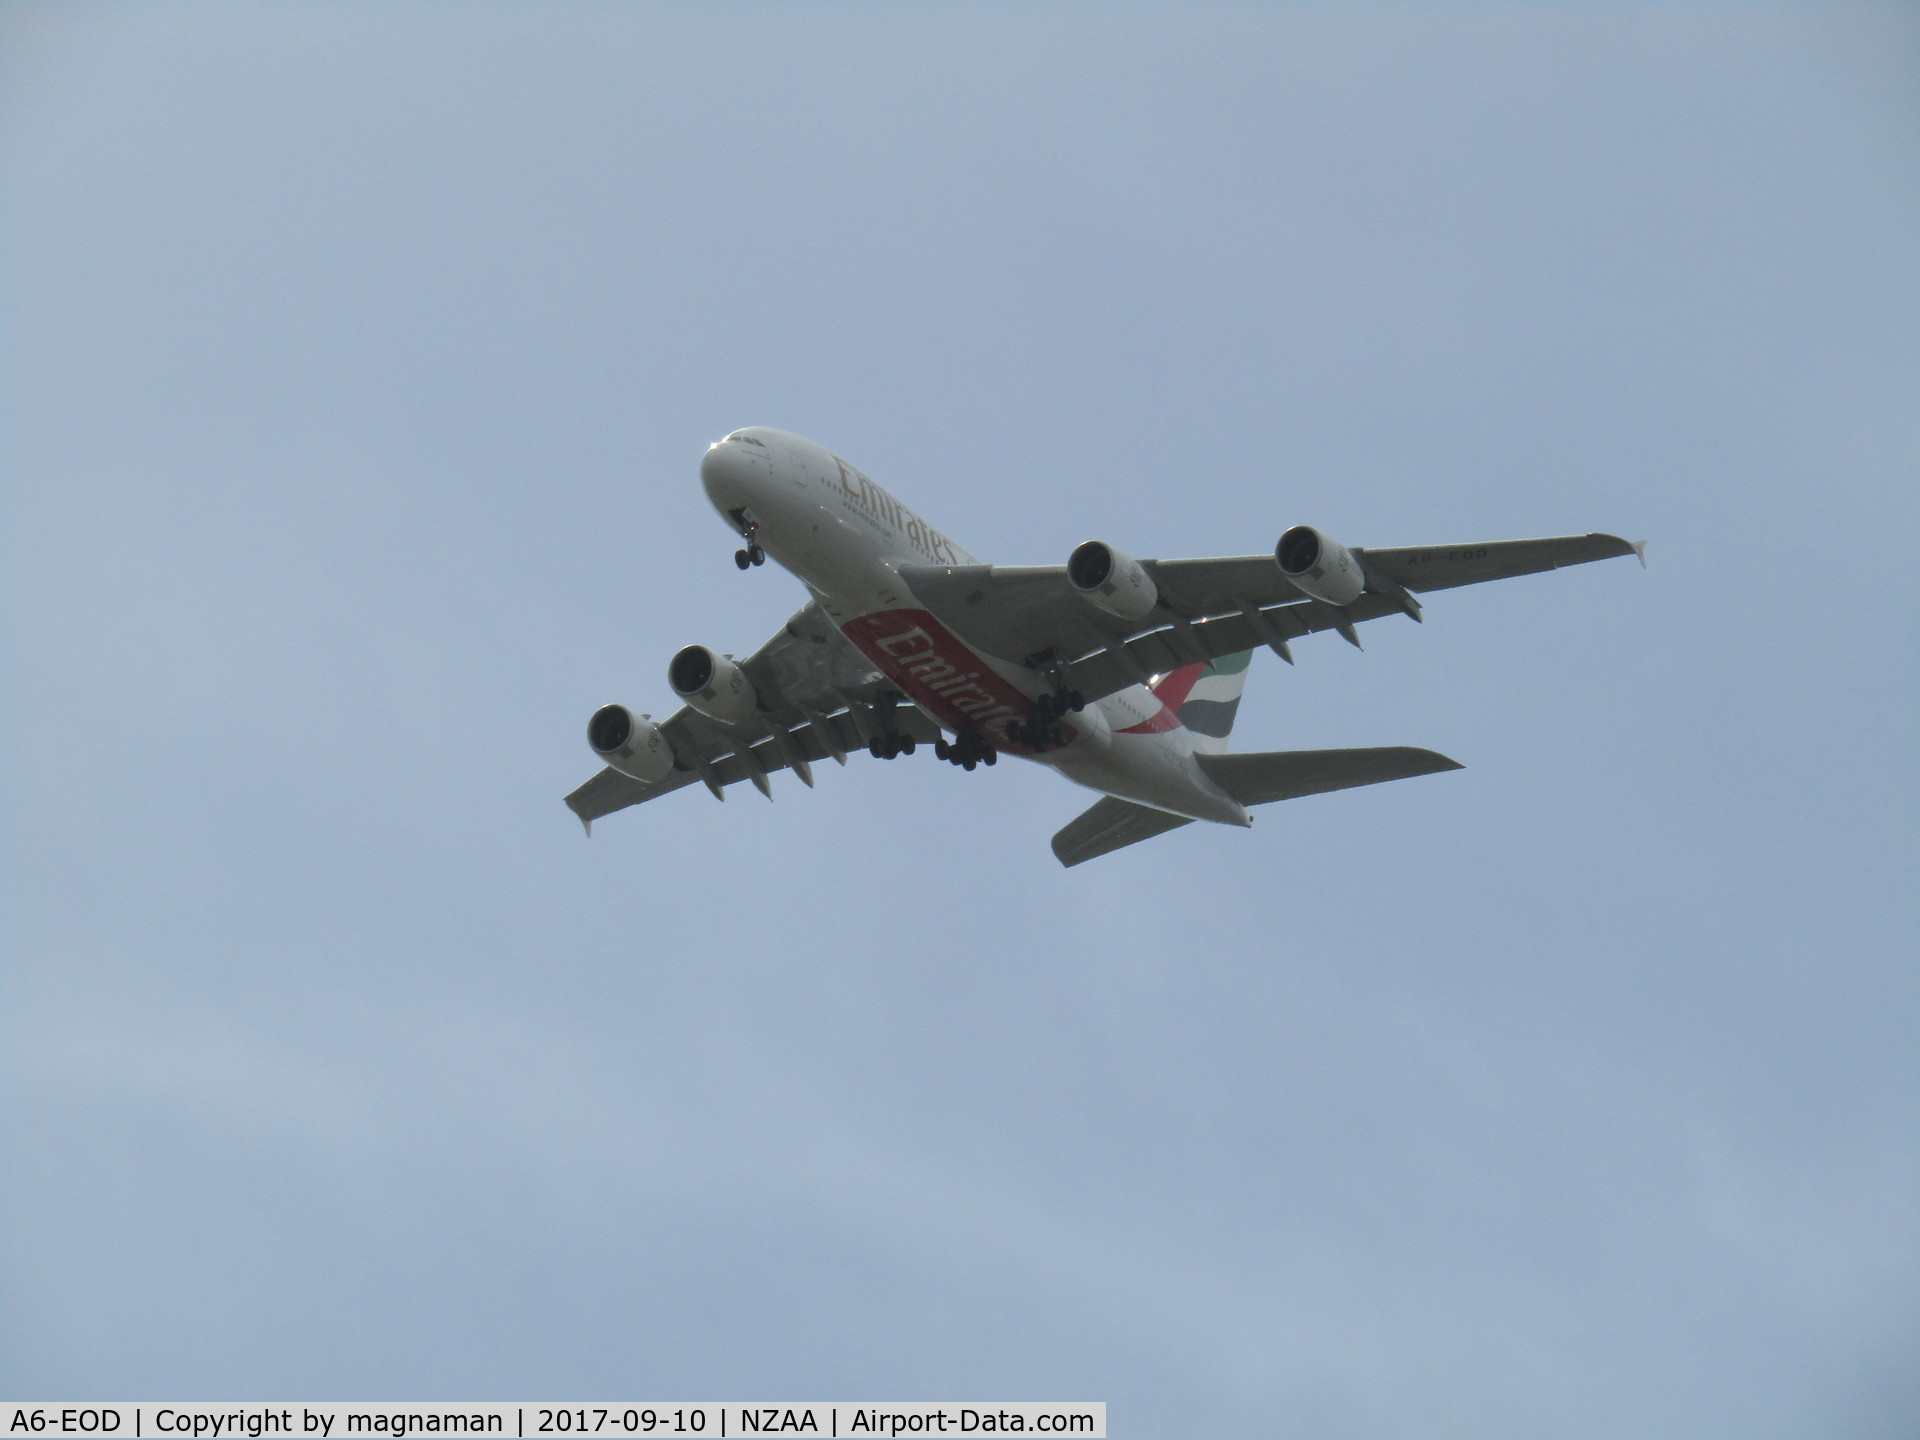 A6-EOD, 2014 Airbus A380-861 C/N 168, over manukau on finals